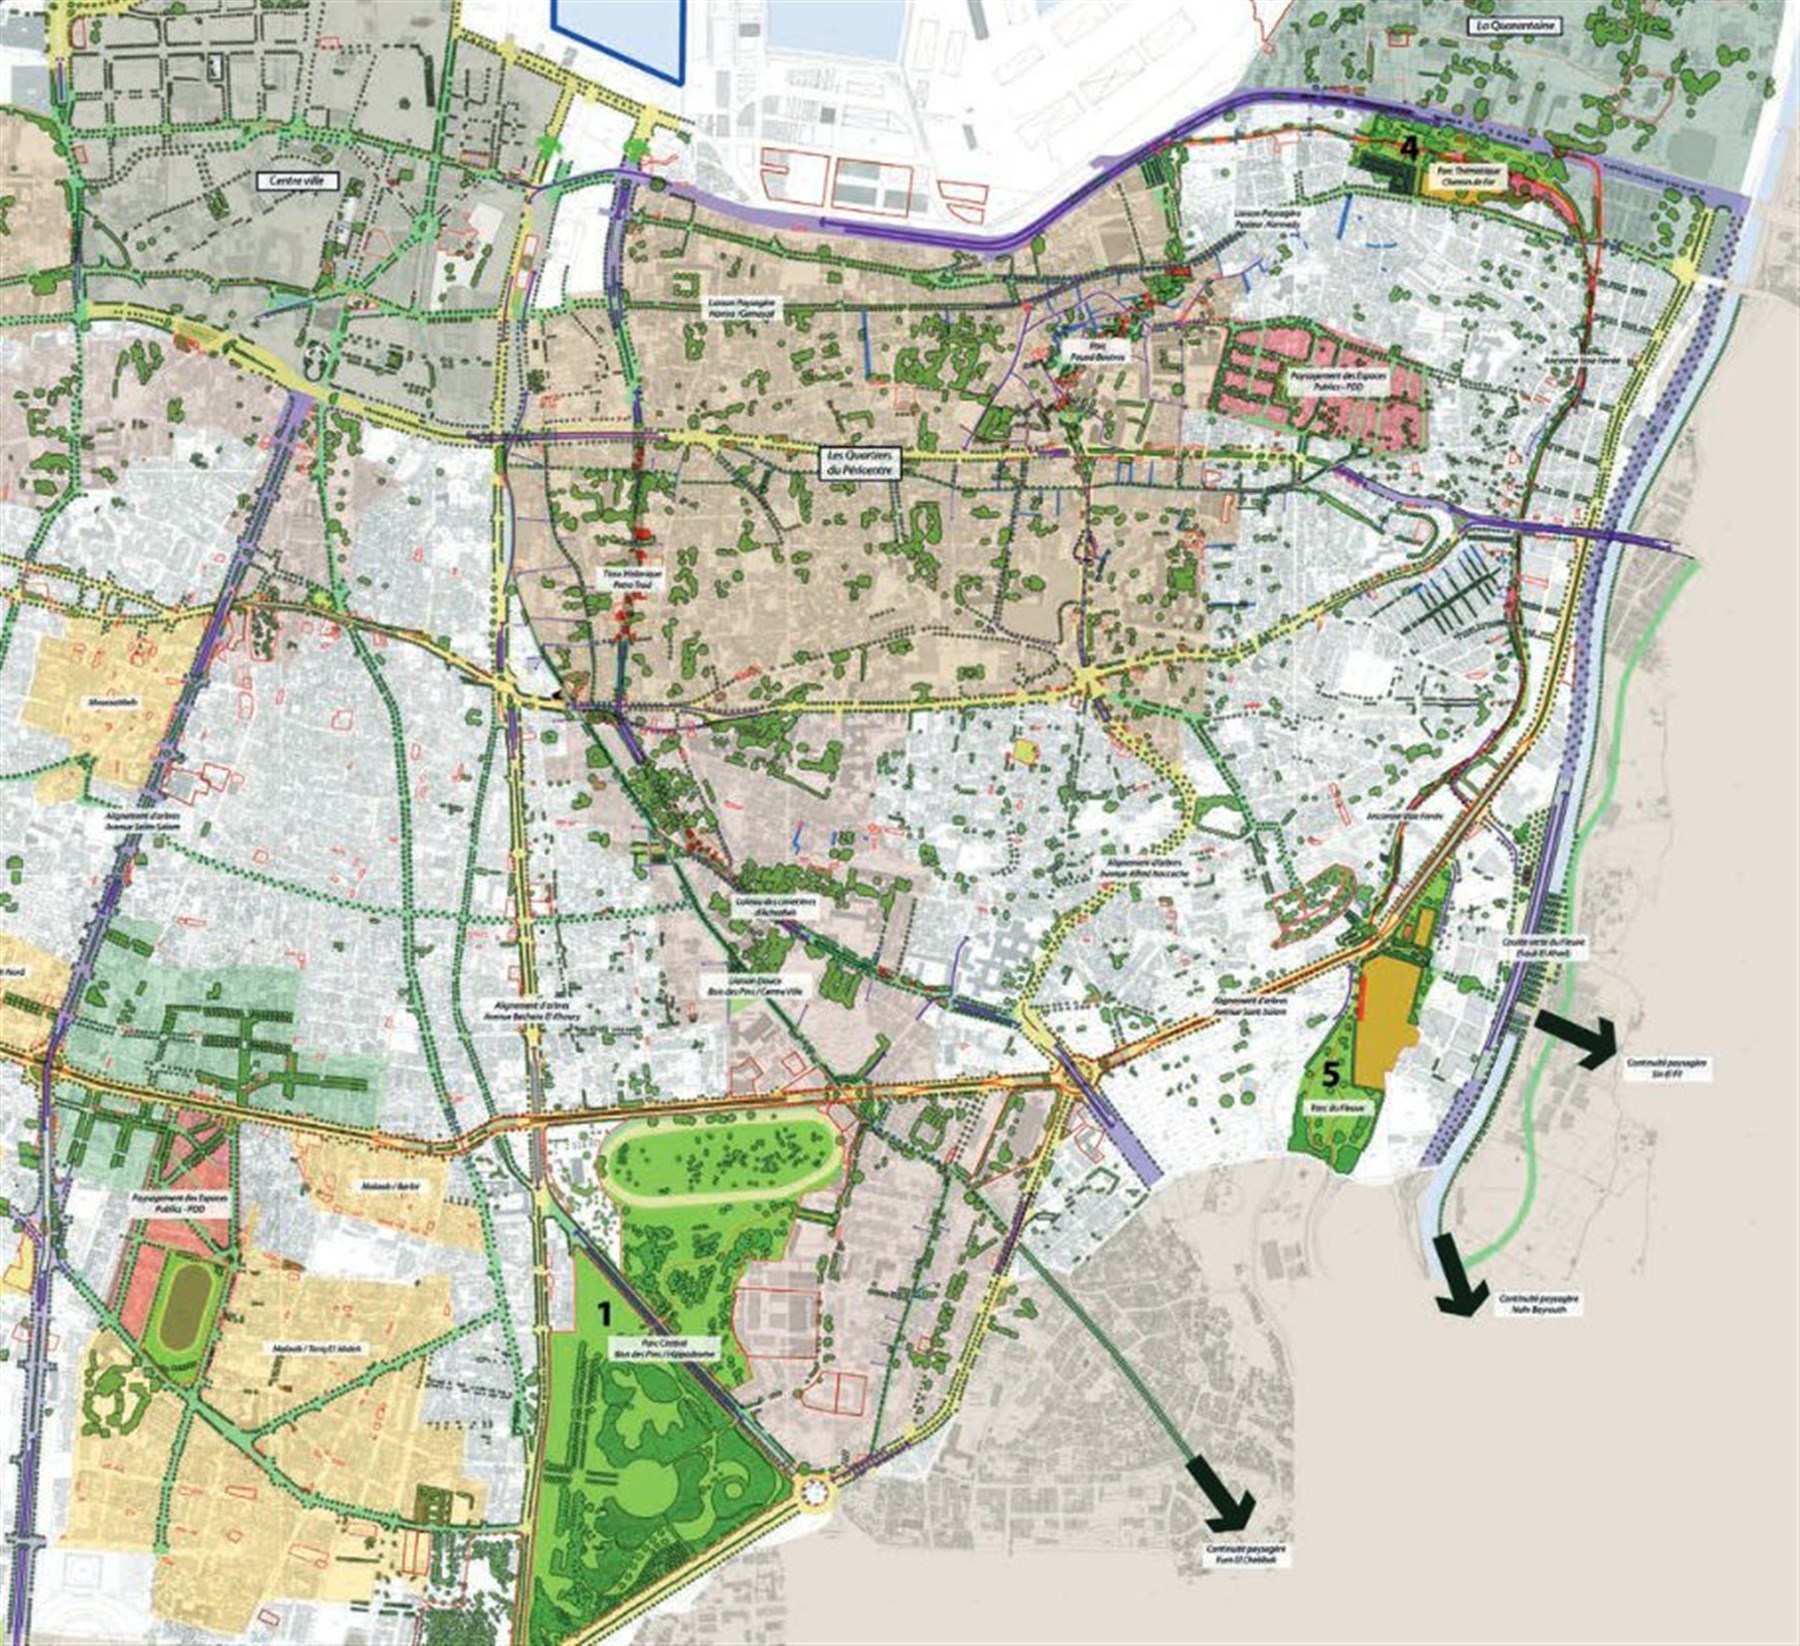 Plan Vert de Beyrouth (2014), developed with Habib Debs as design lead